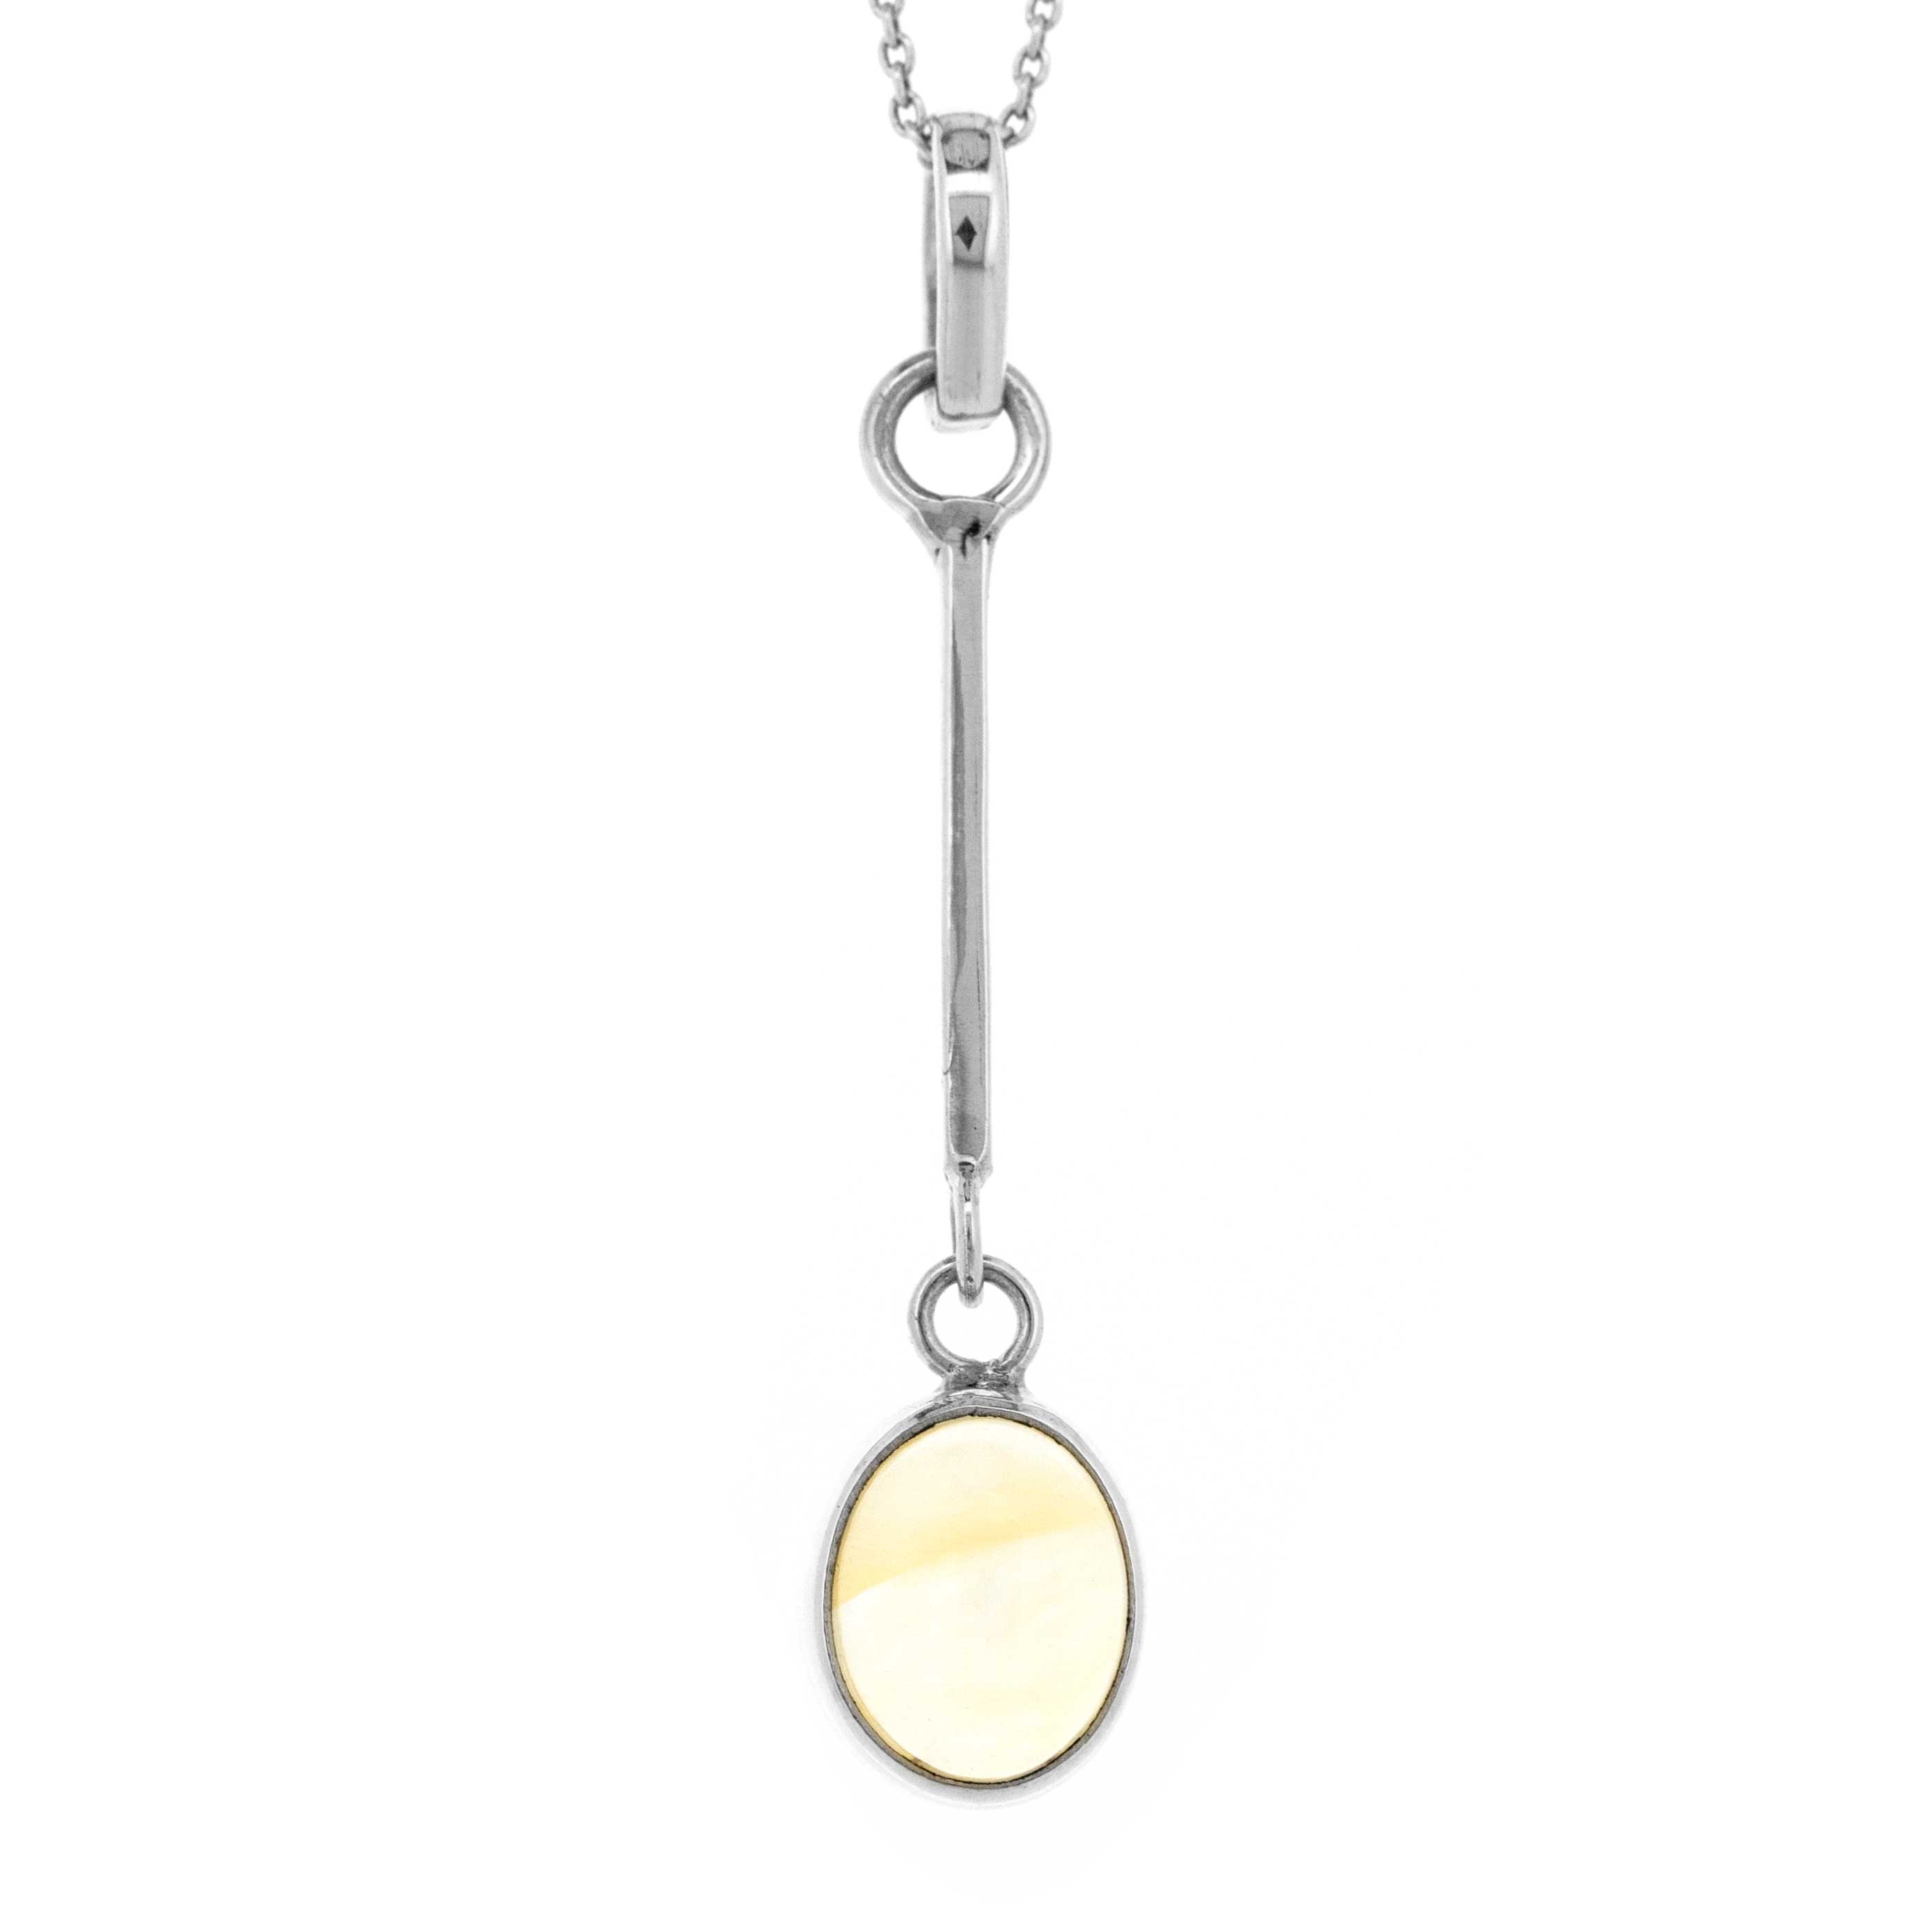 Long Drop Pendant with Oval Stone